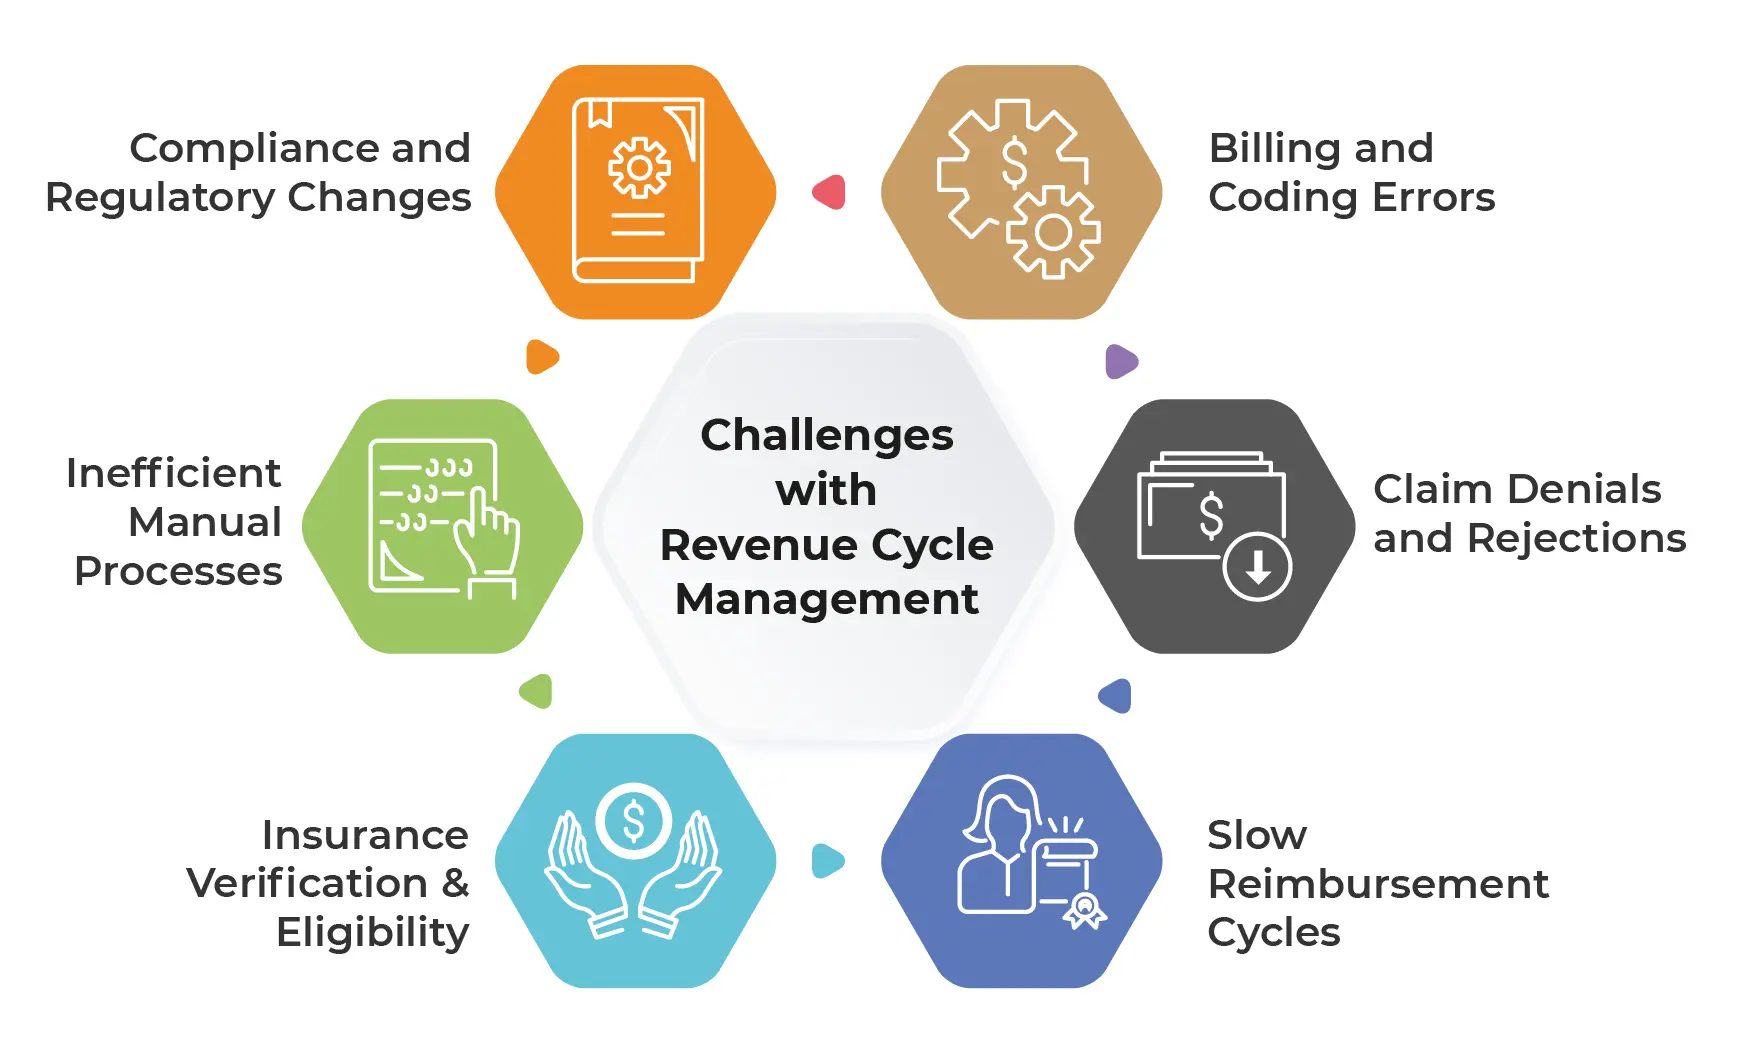 Challenges with Revenue Cycle Management